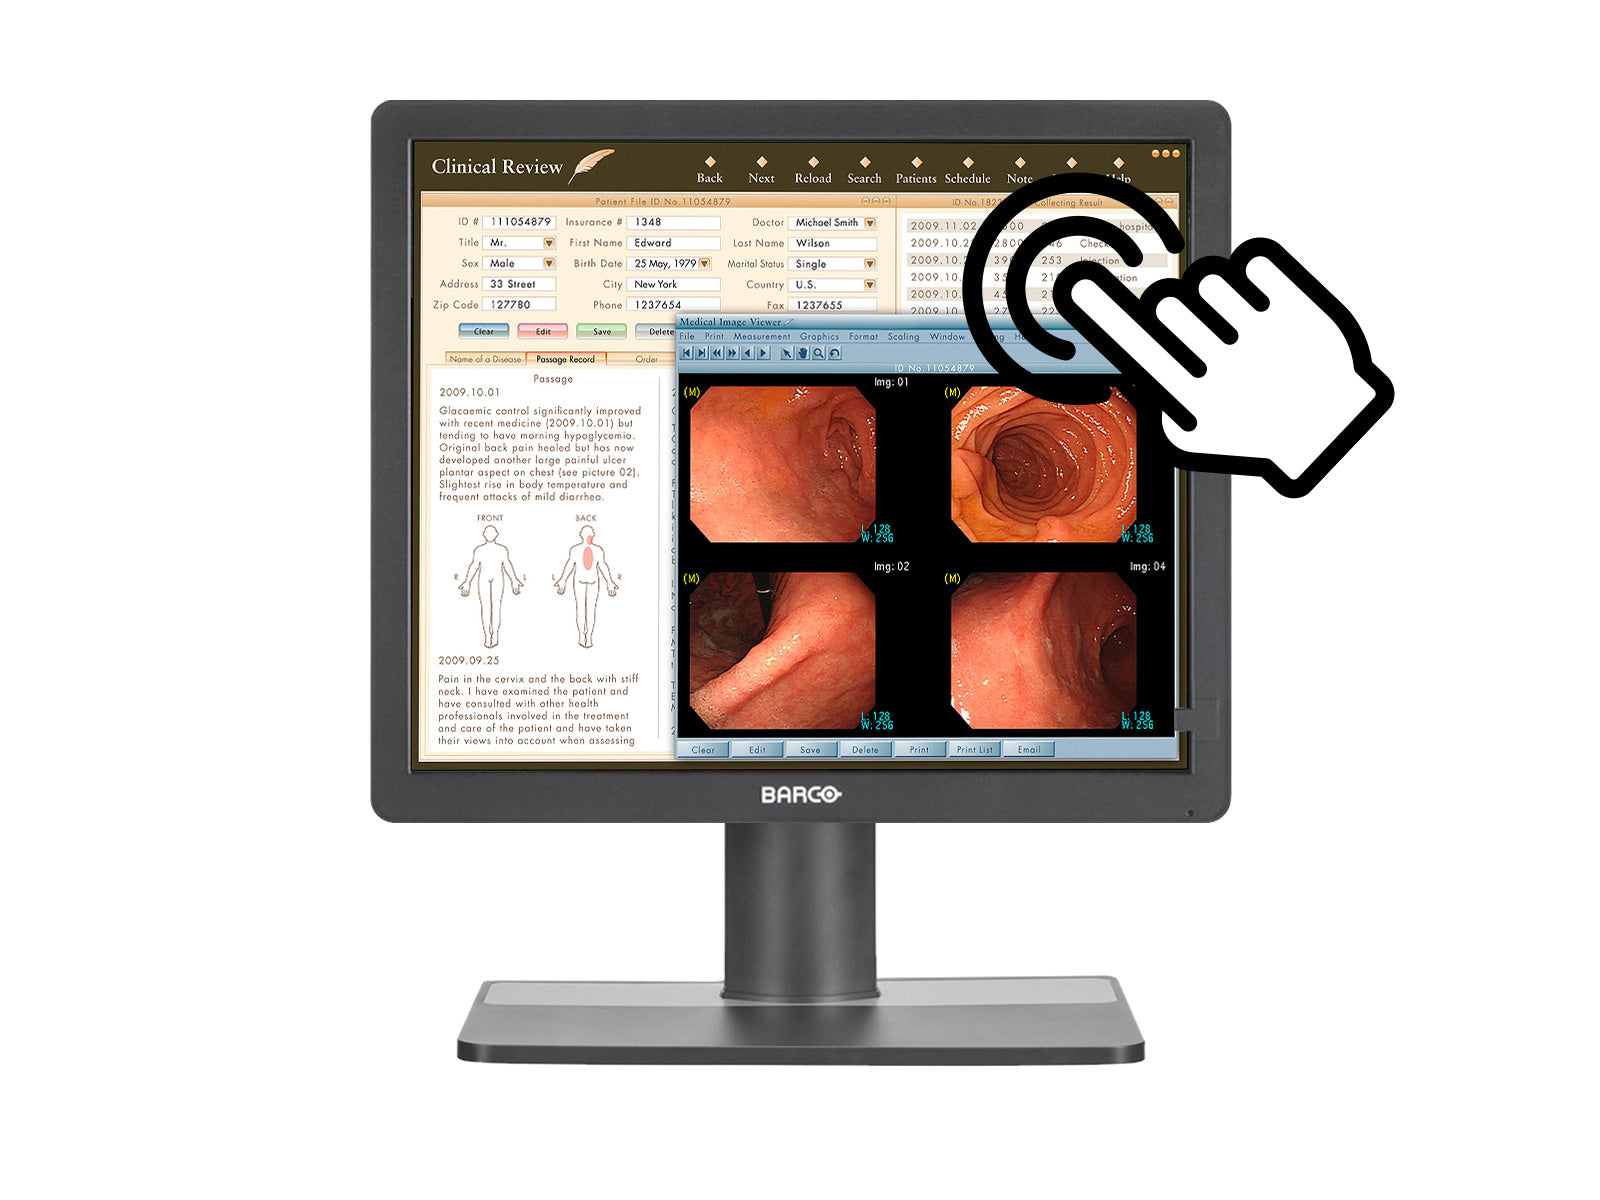 Barco MDRC-1219 TS 1MP 19" Color Touchscreen Clinical Review Display (K9301821A) Monitors.com 